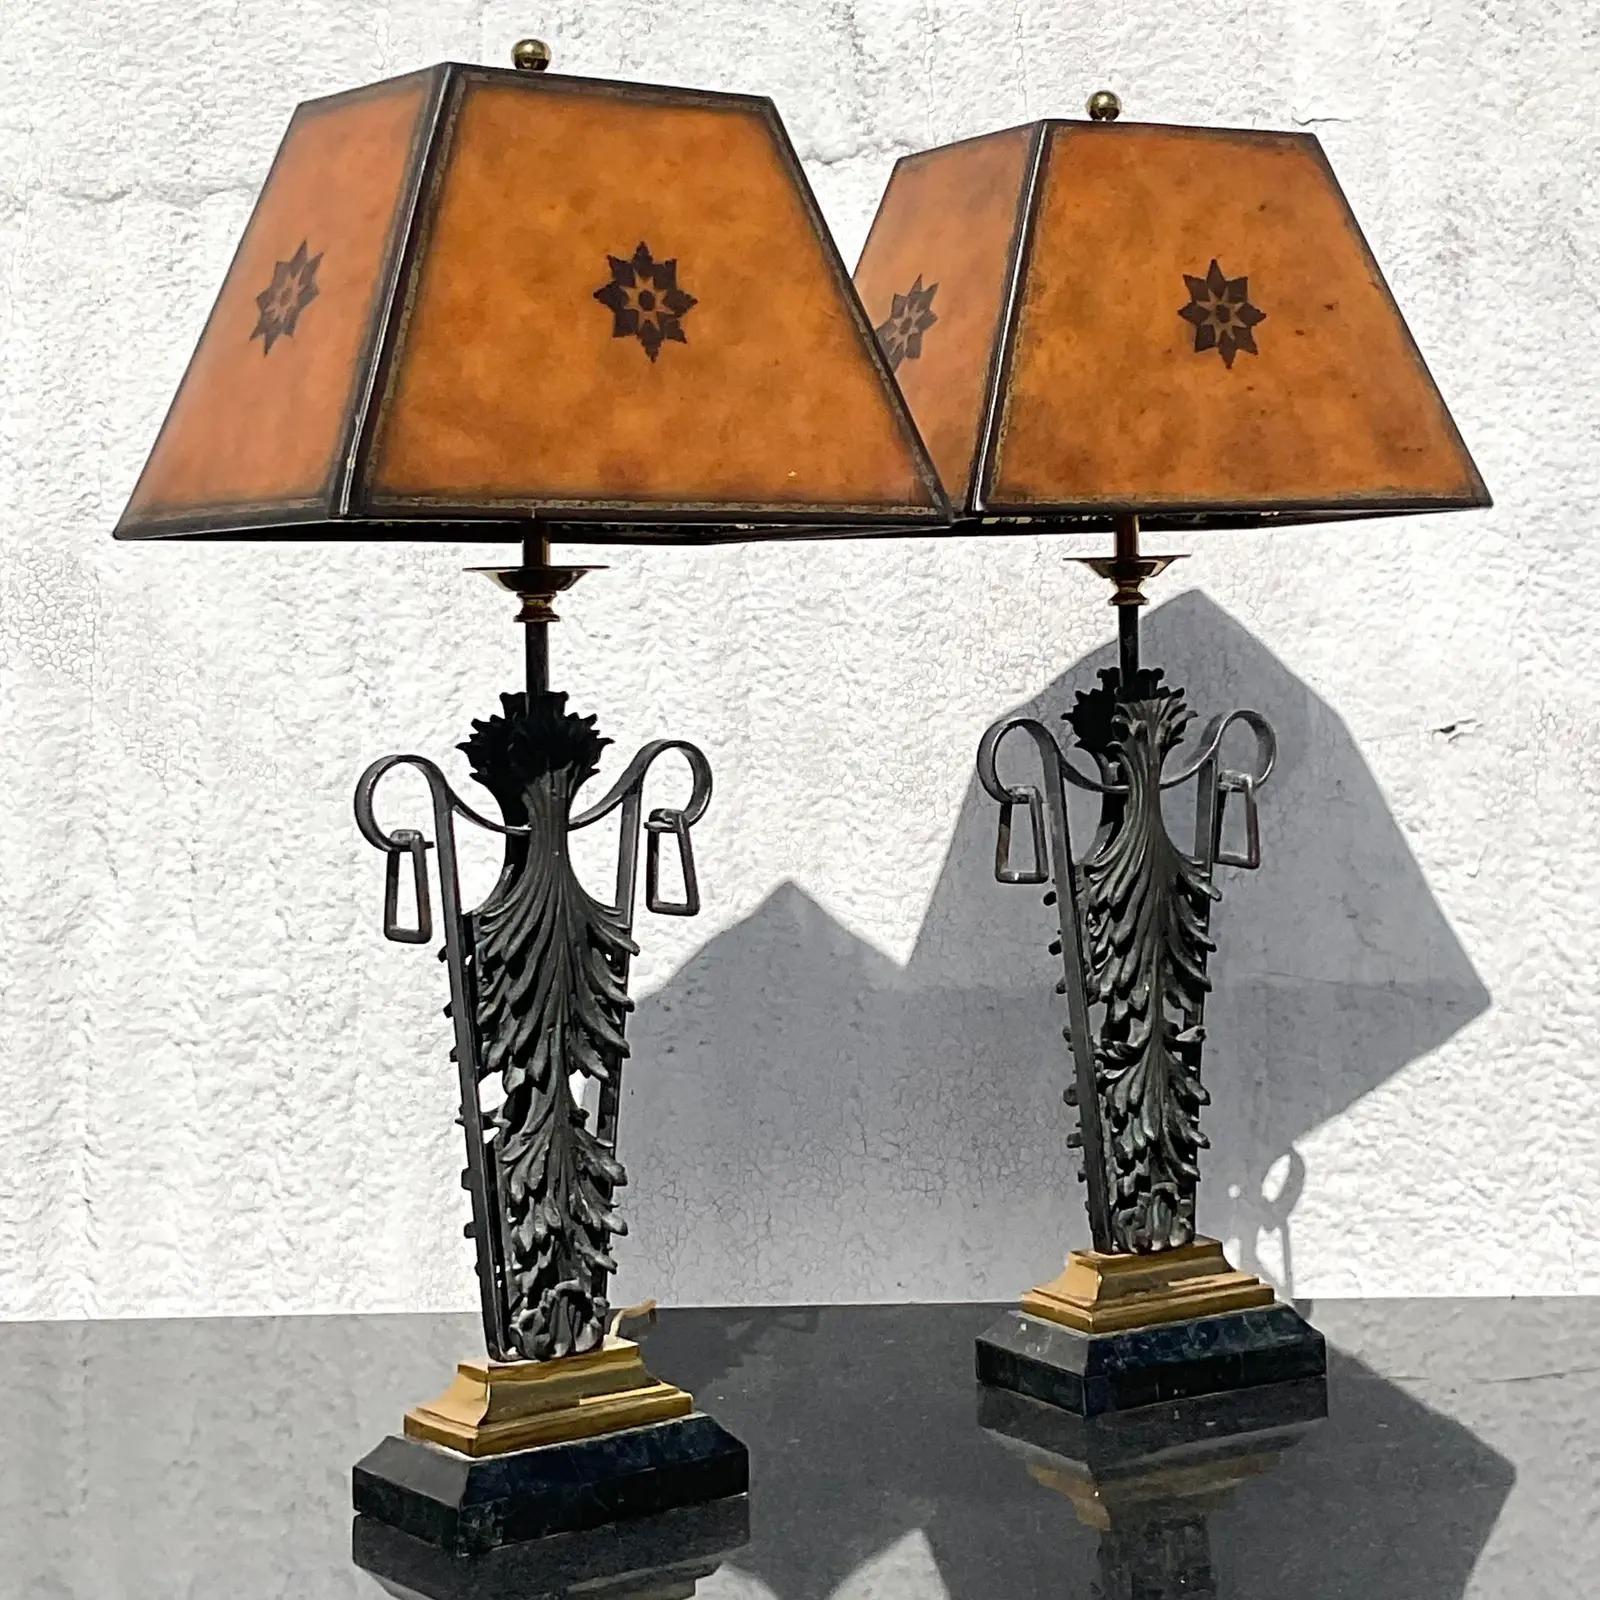 A stunning pair of vintage Regency floor lamps. Made by the iconic Maitland Smith group. Beautiful scroll leaf design with a chic patinated finish. Beautiful matching shades included. Marked on the bottom. Acquired from a Palm Beach estate.

The